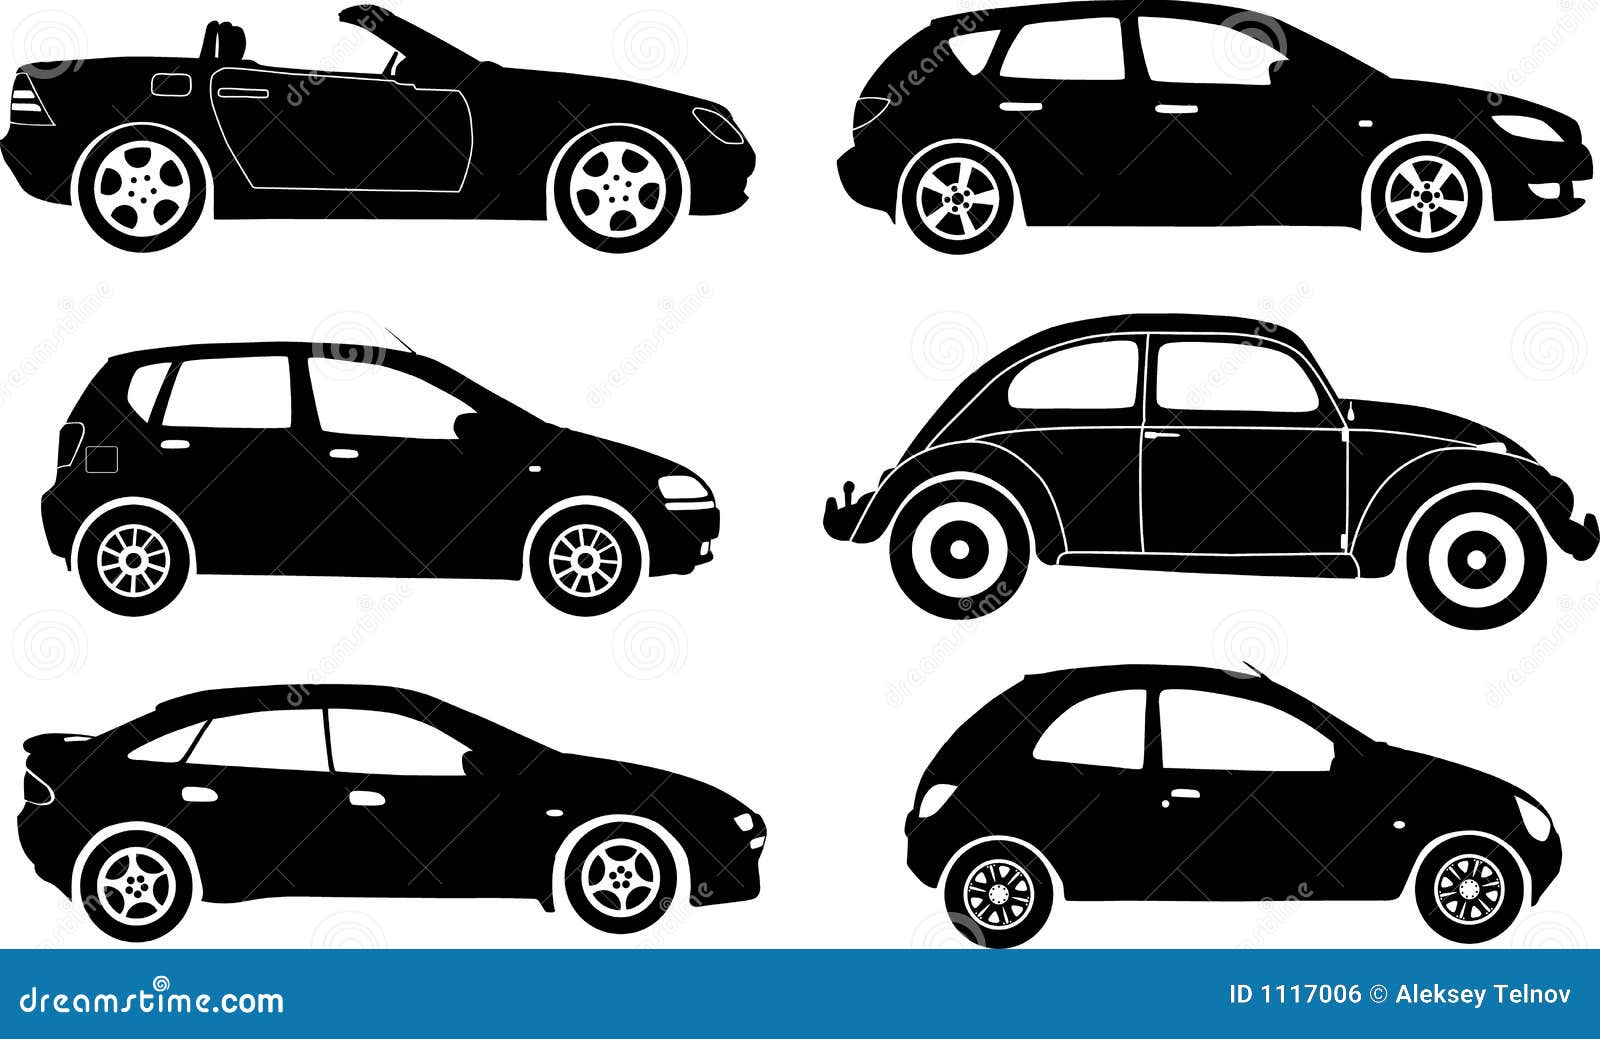 car clipart vector free download - photo #38